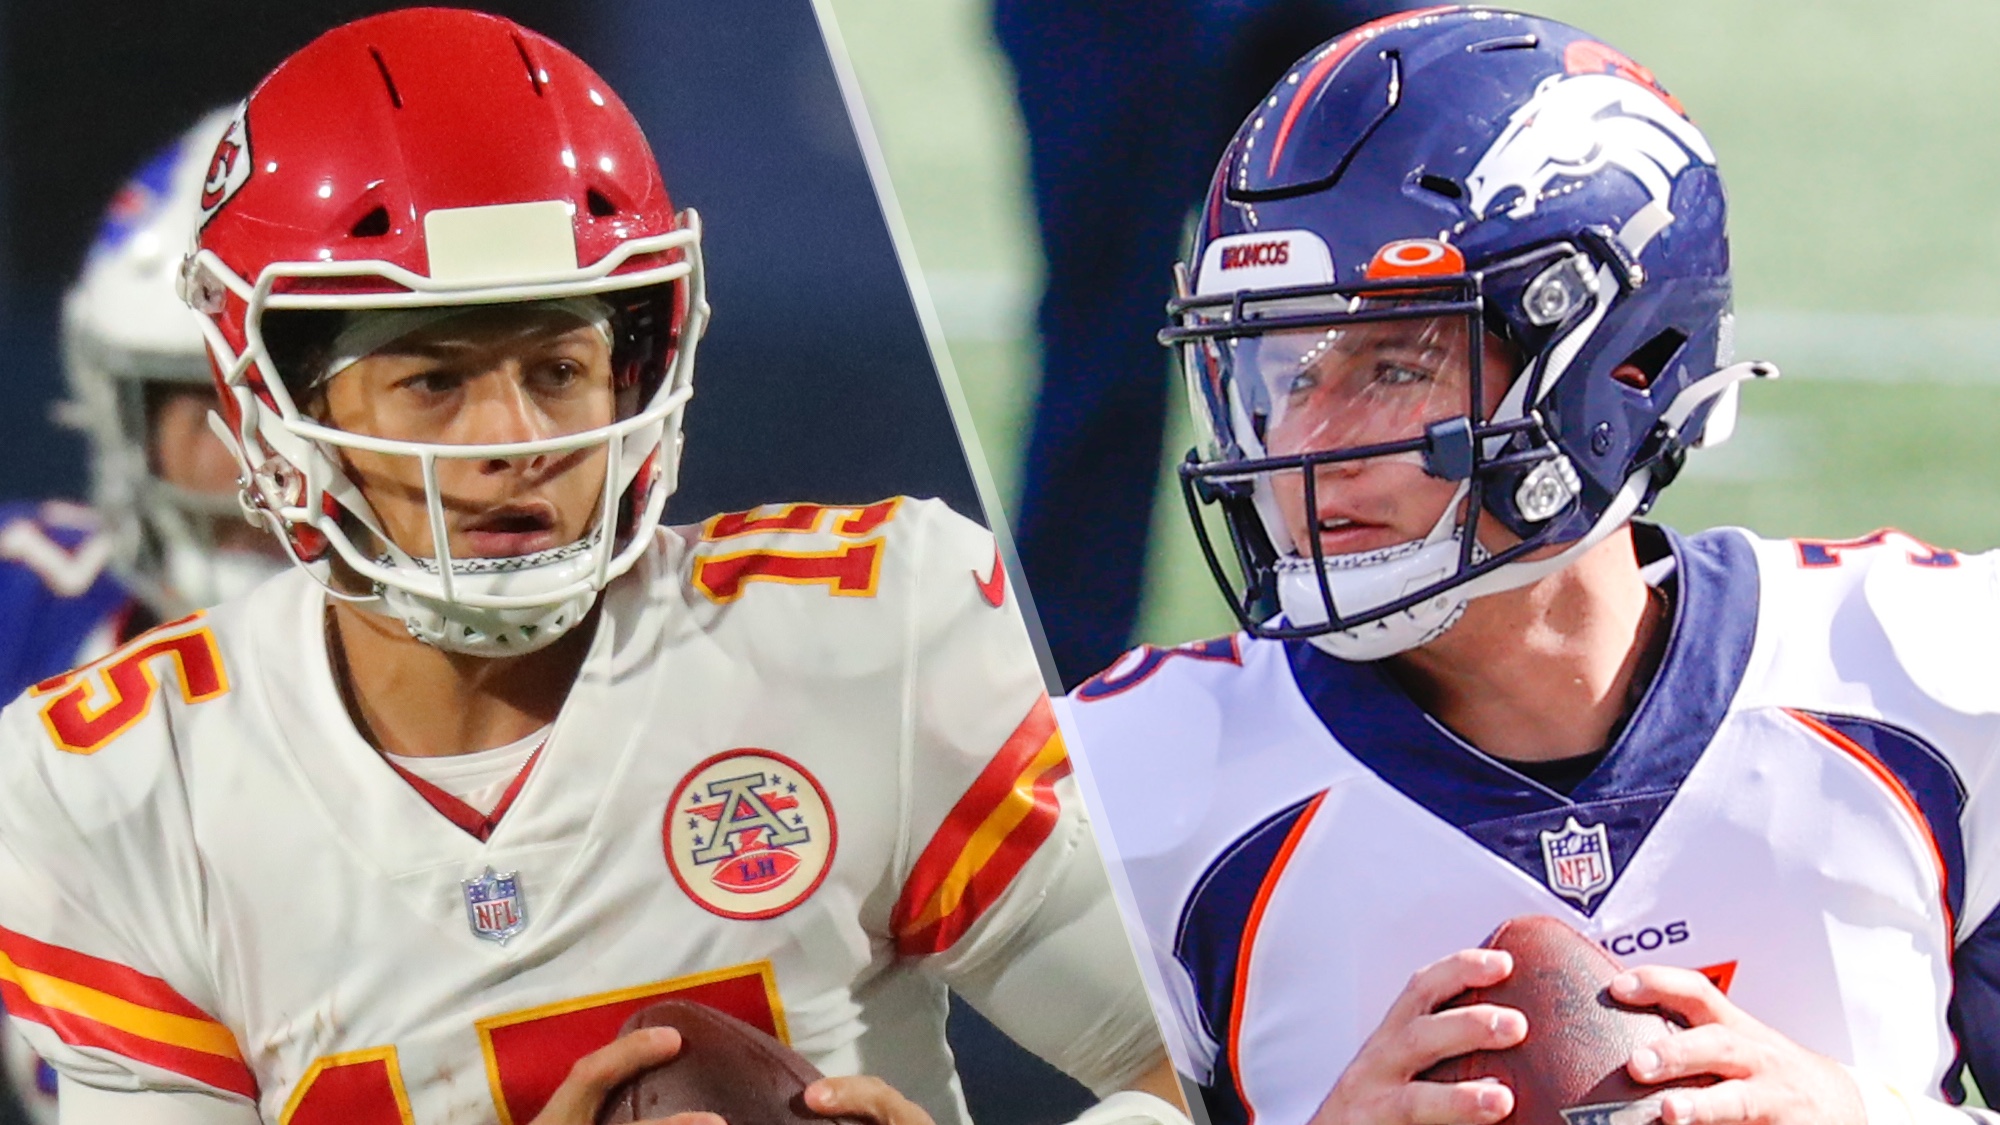 Chiefs vs Broncos live stream: How to watch NFL week 7 game online